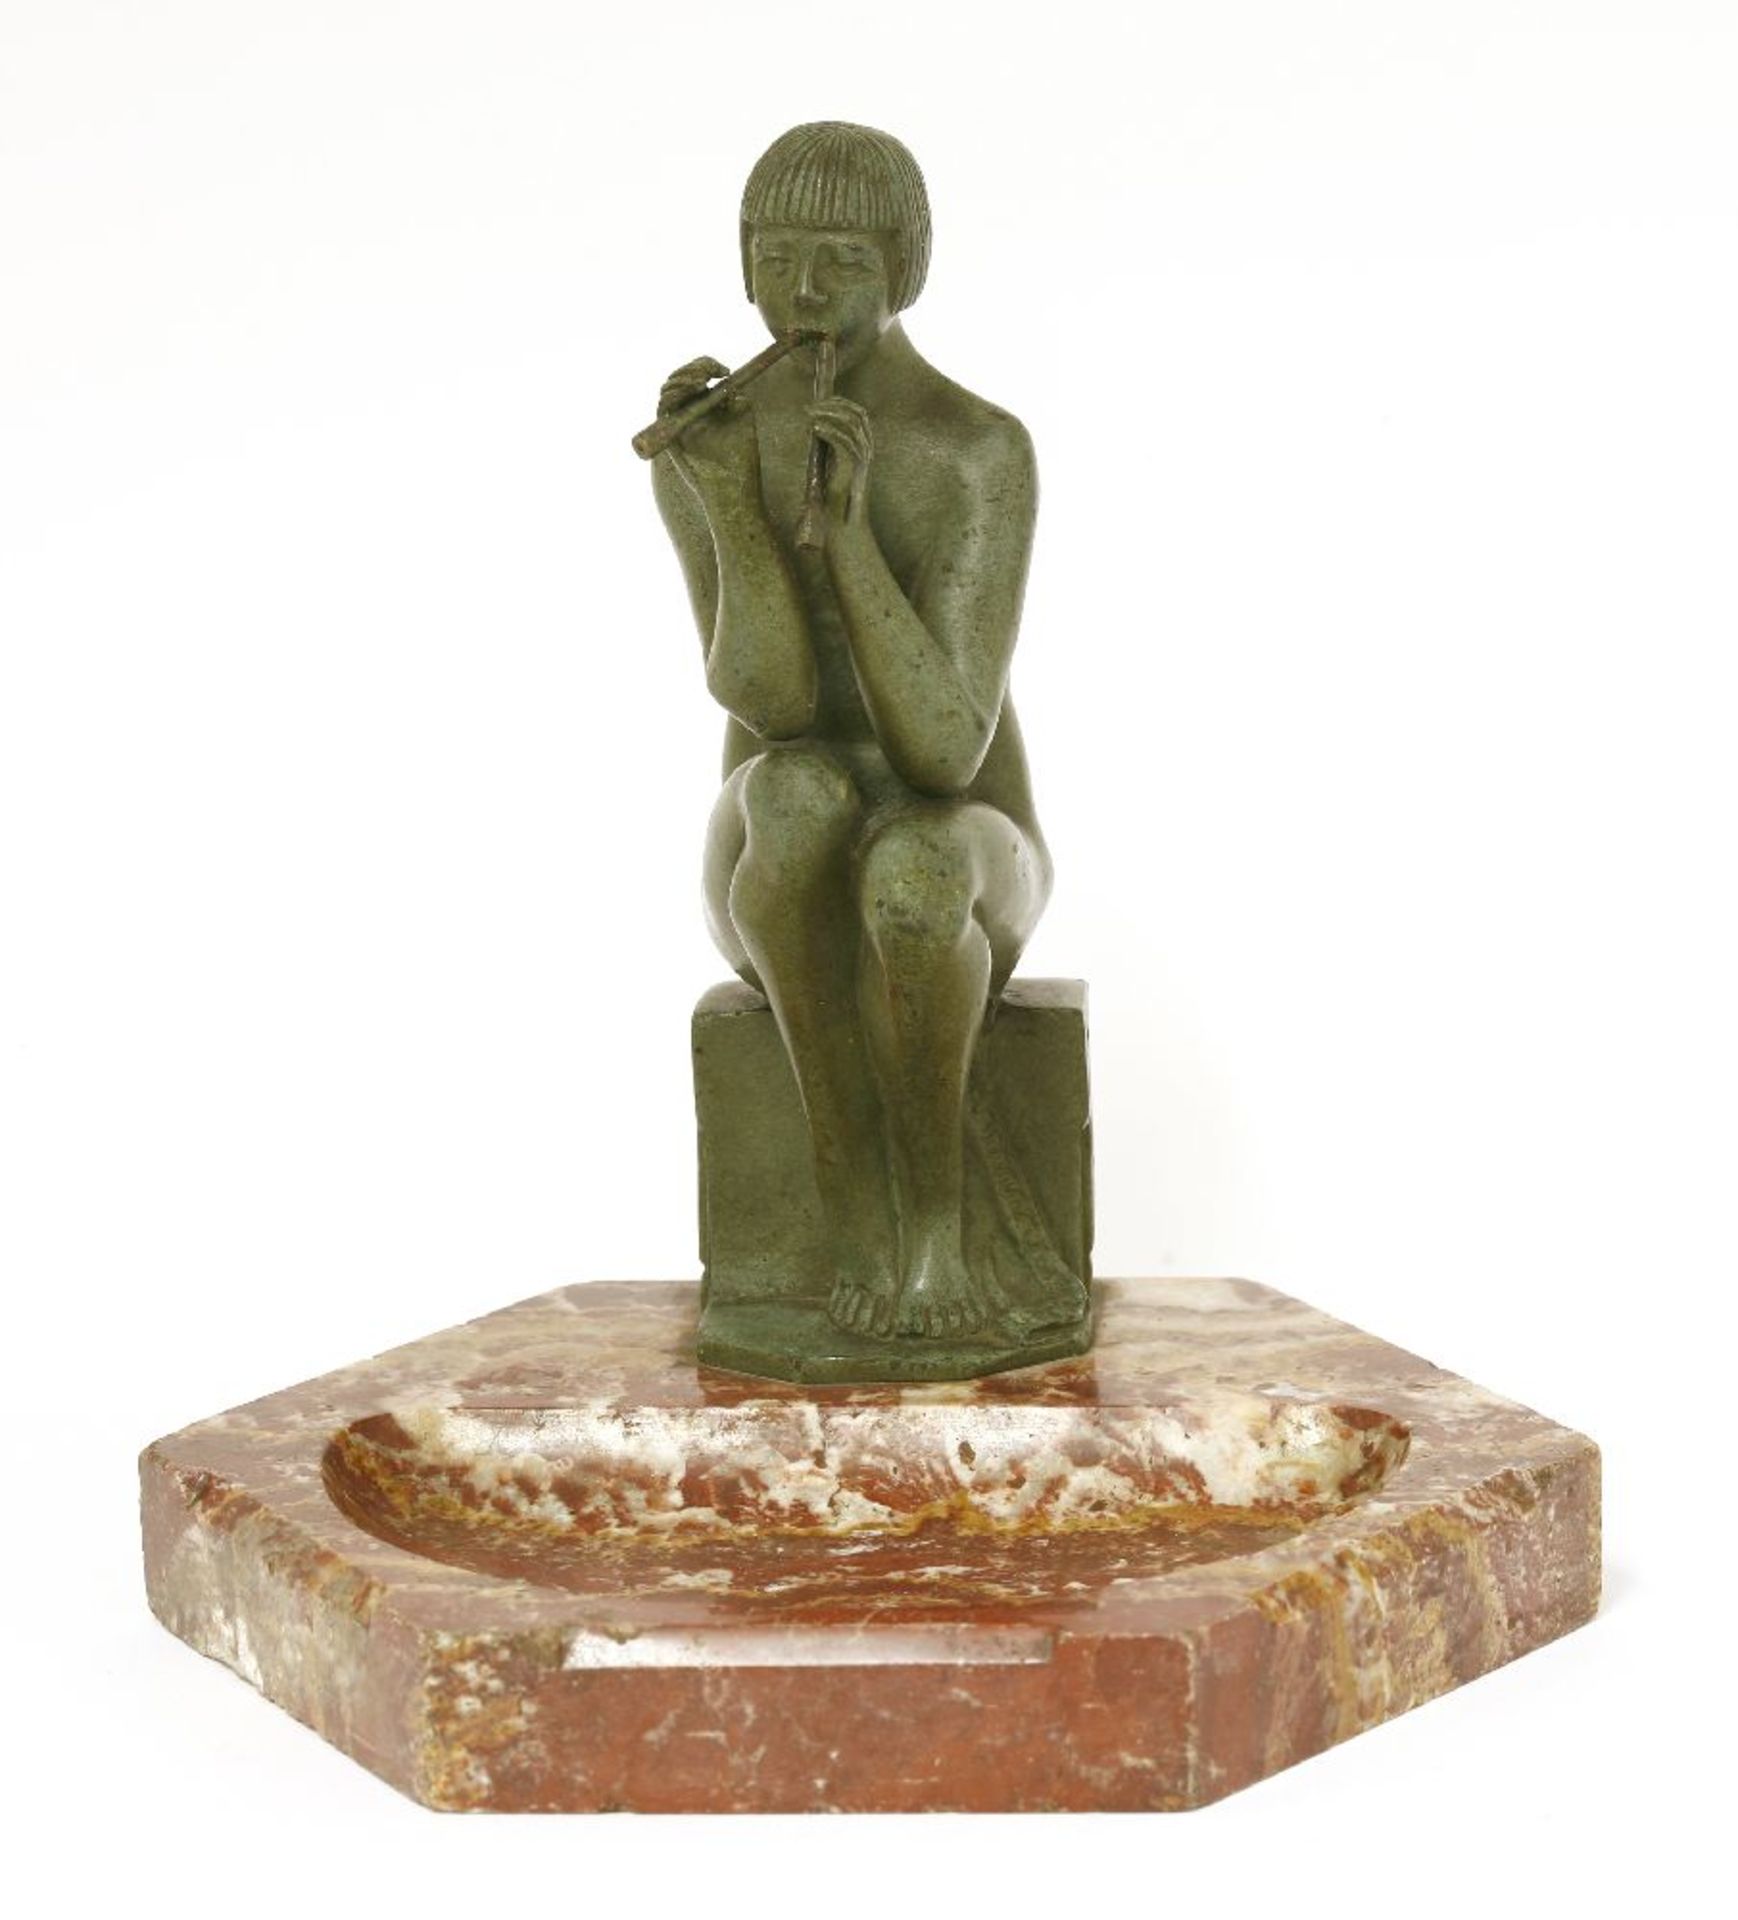 A patinated bronze nude figure playing pan pipes,after Alex Kelety, seated on a plinth, mounted on a